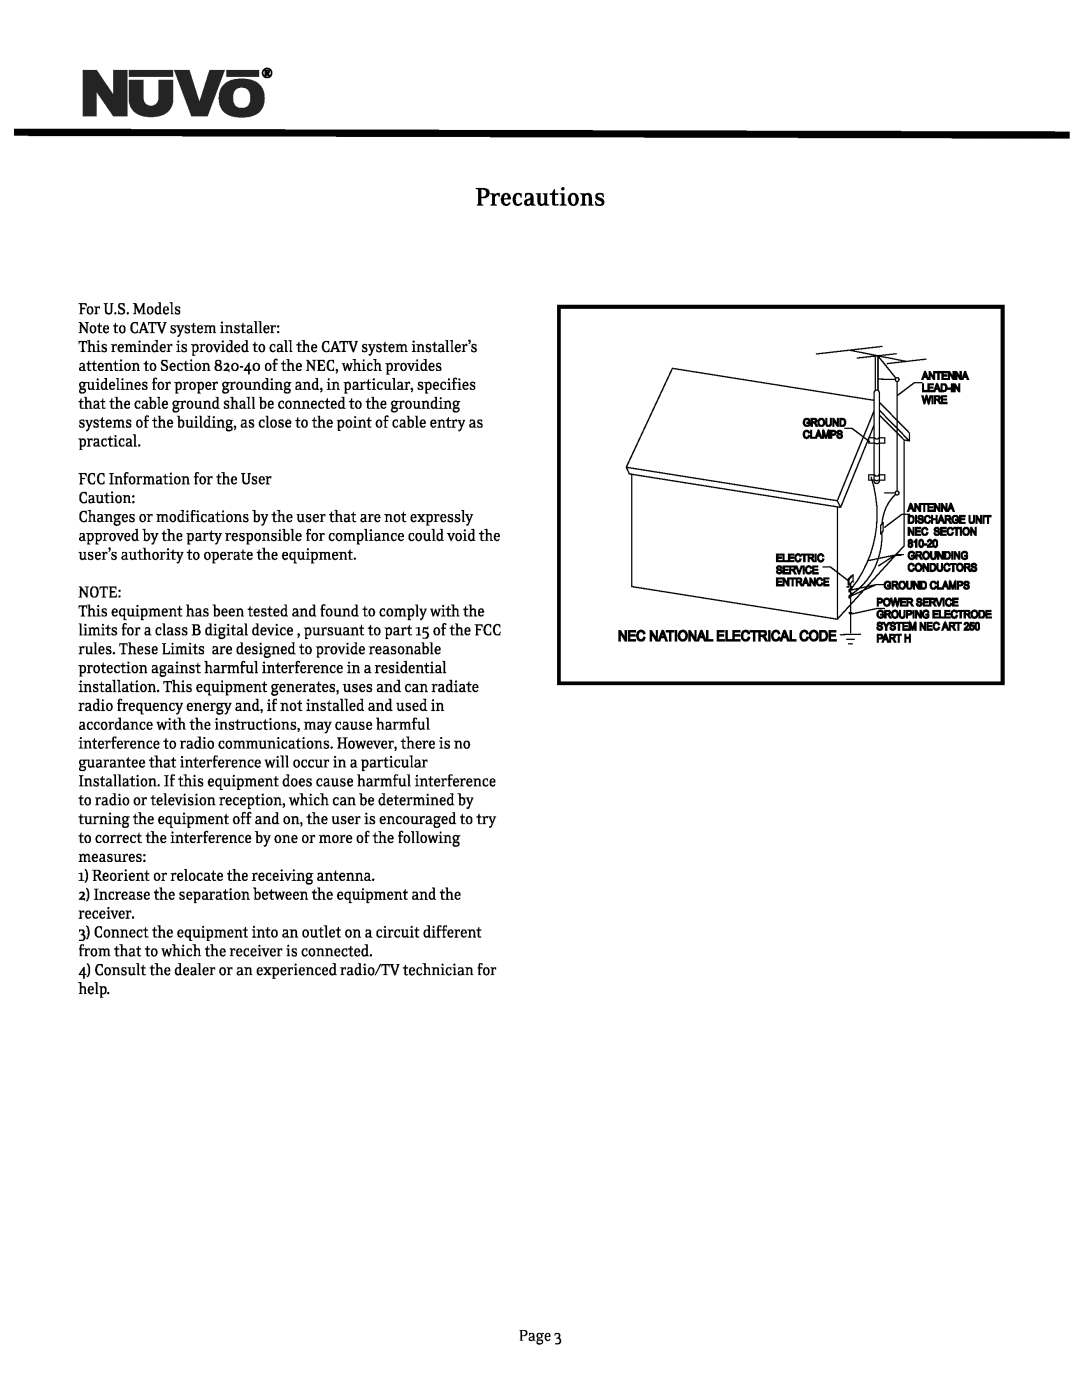 Nuvo NV-T2DF manual Page, Nec National Electrical Code 